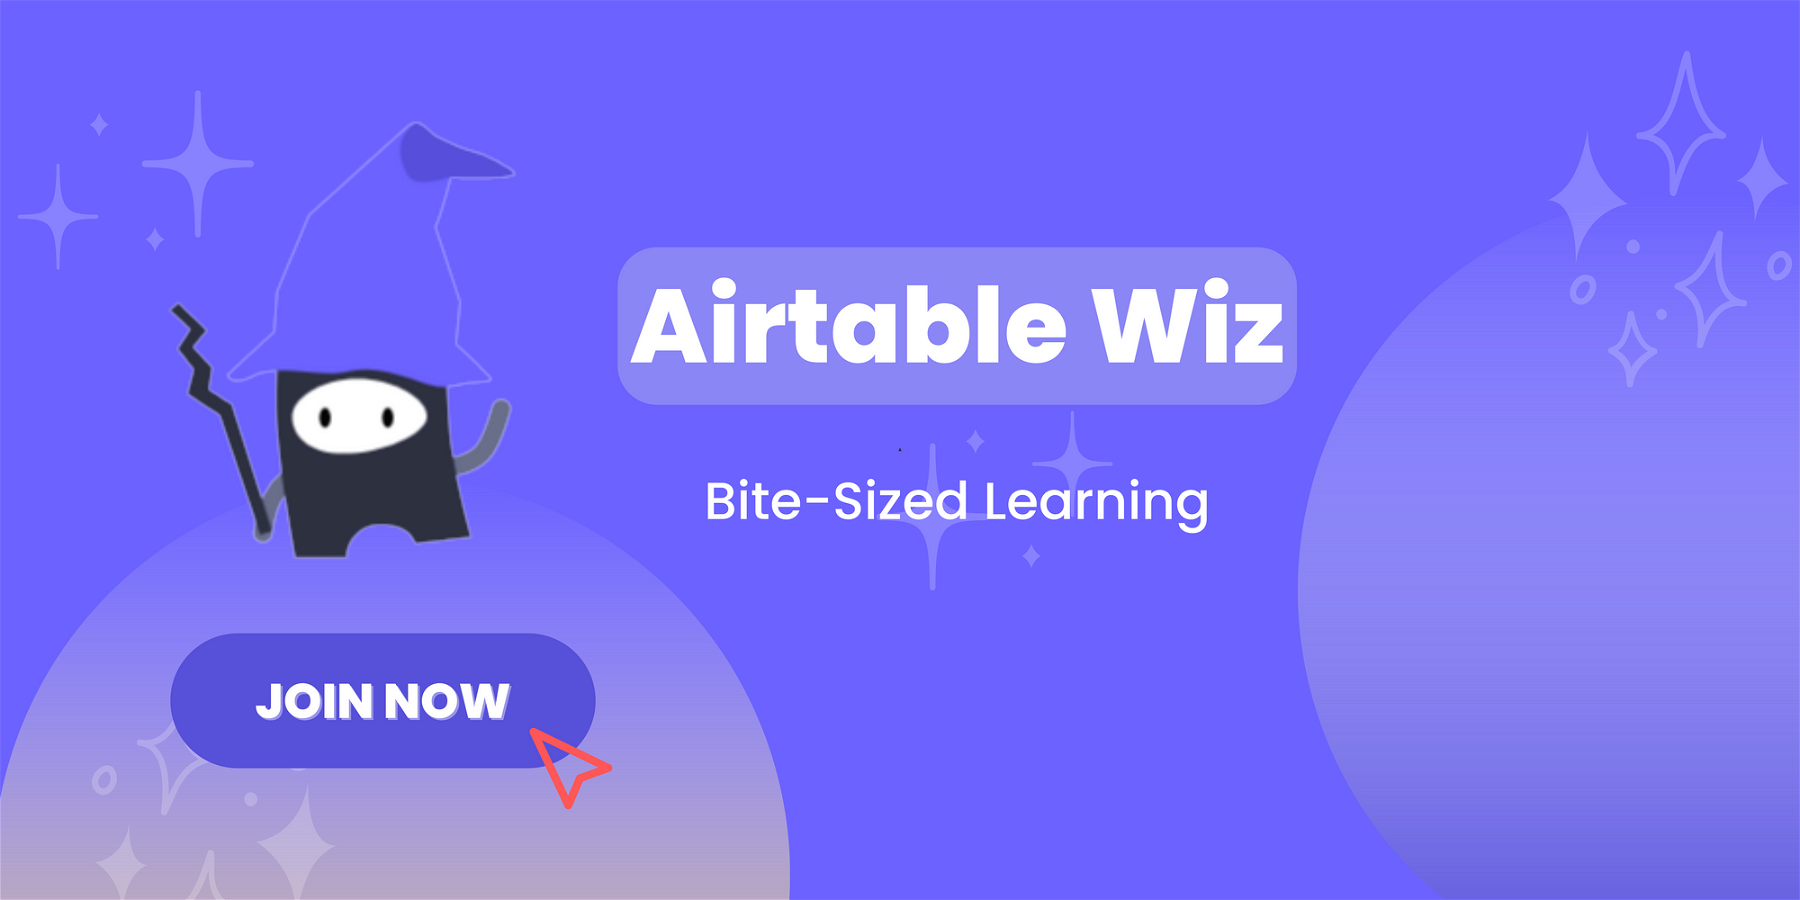 Welcome to Airtable Wiz!🎉